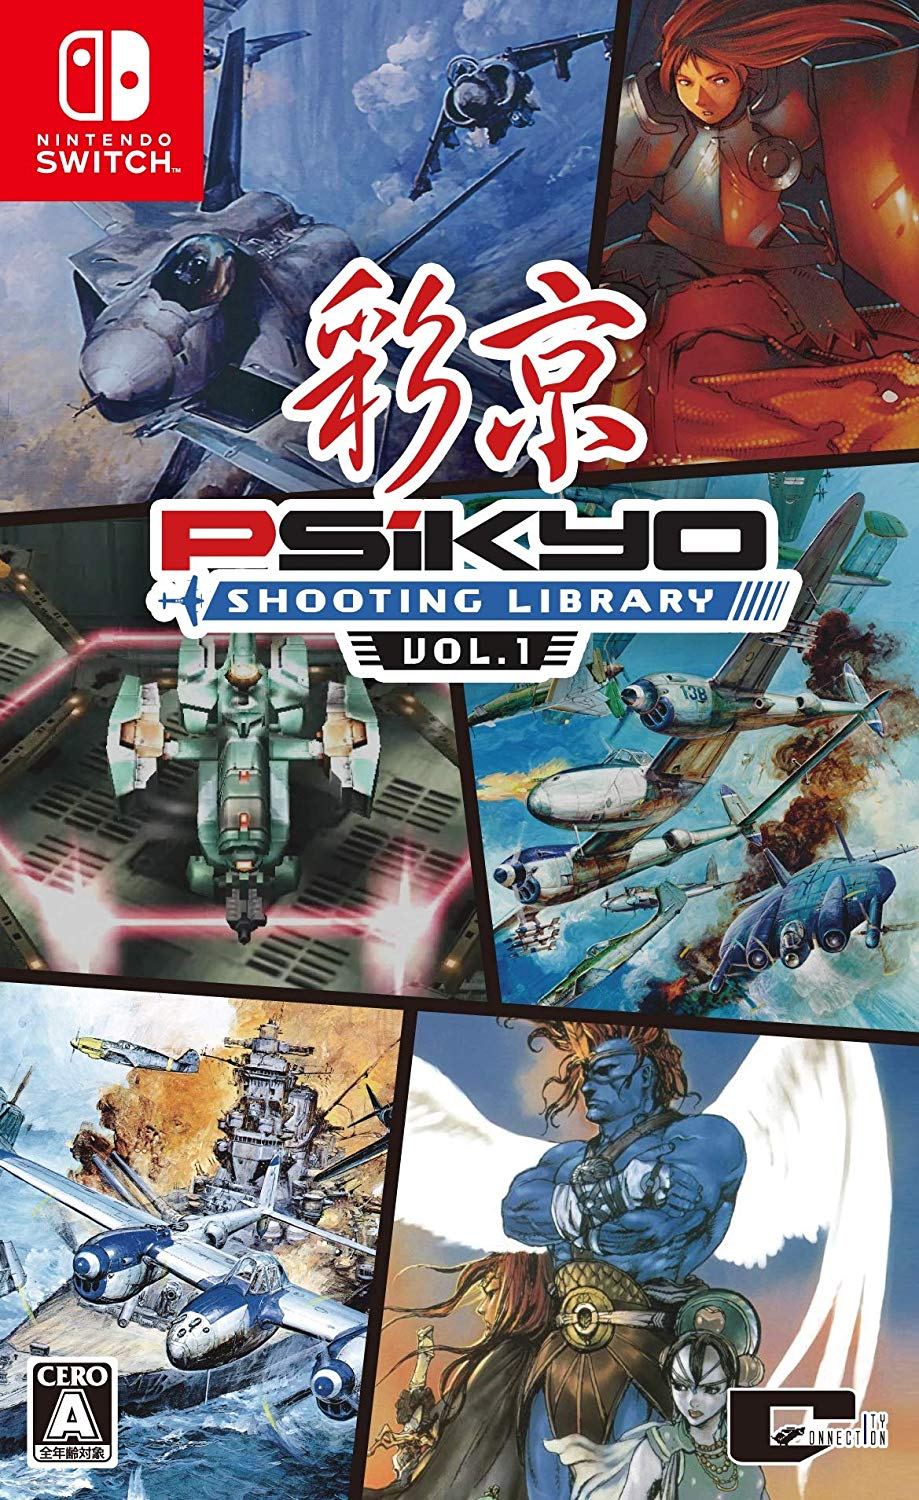 Psikyo Shooting Library Vol. 1 (Multi-Language) for Nintendo Switch